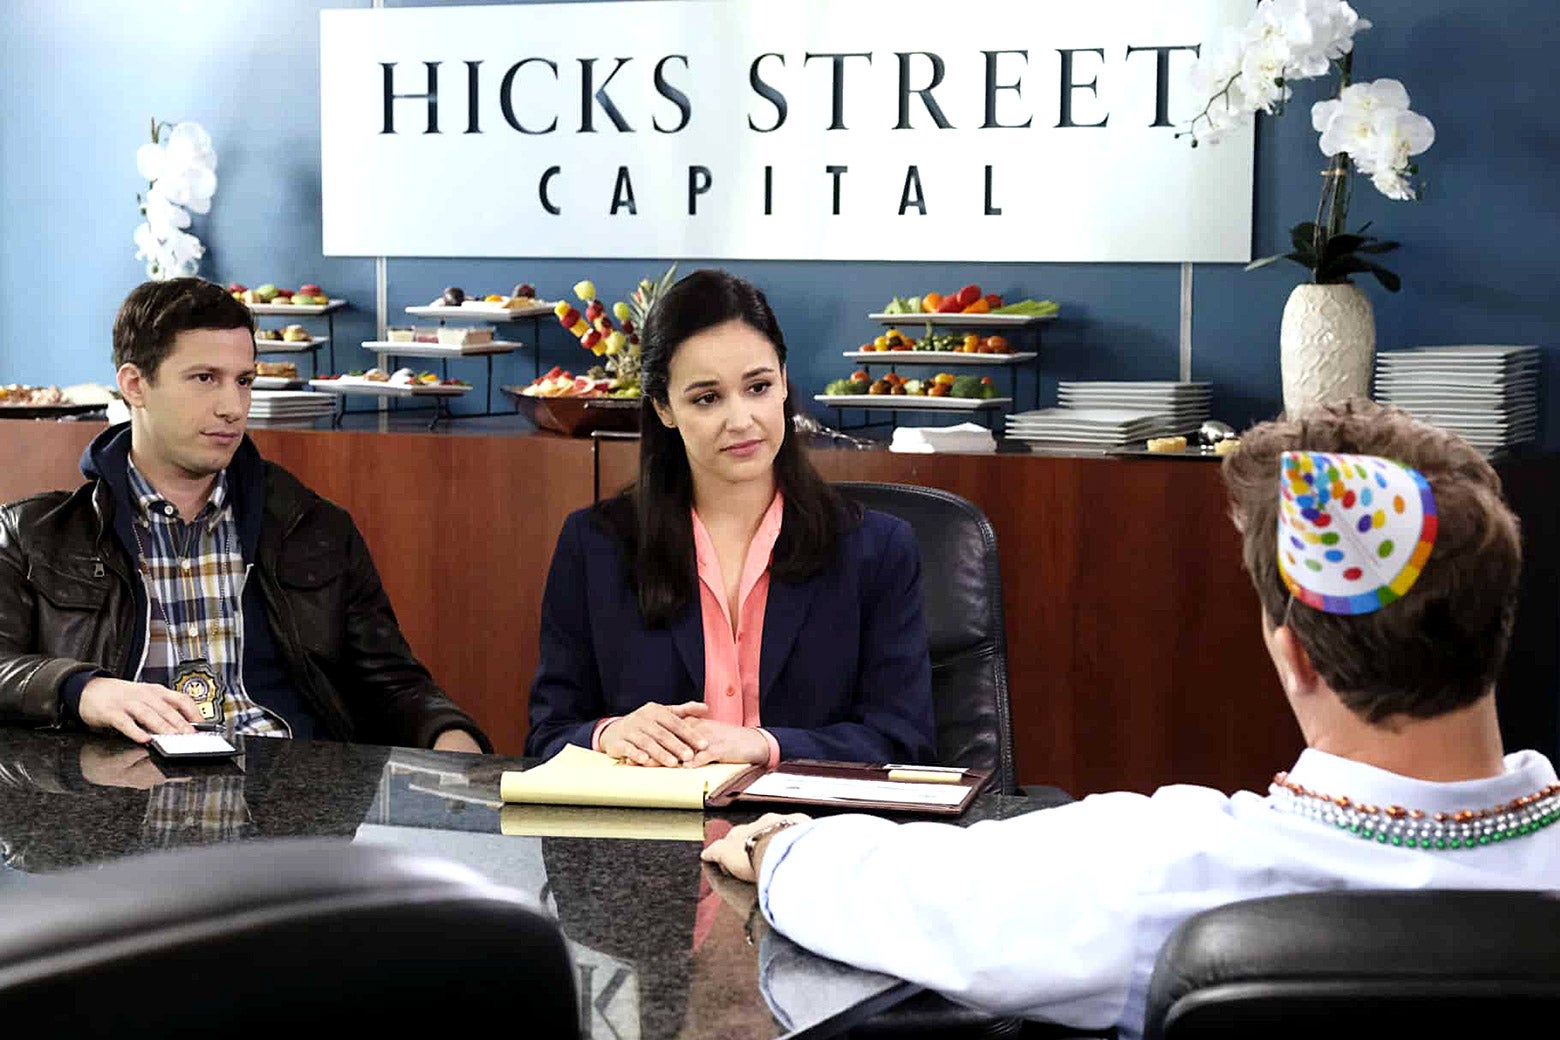 Andy Samberg and Melissa Fumero as Jake and Amy in a scene from Brooklyn Nine-Nine. Jake and Amy are seated at a conference table interrogating a finance bro wearing a party hat and beads.